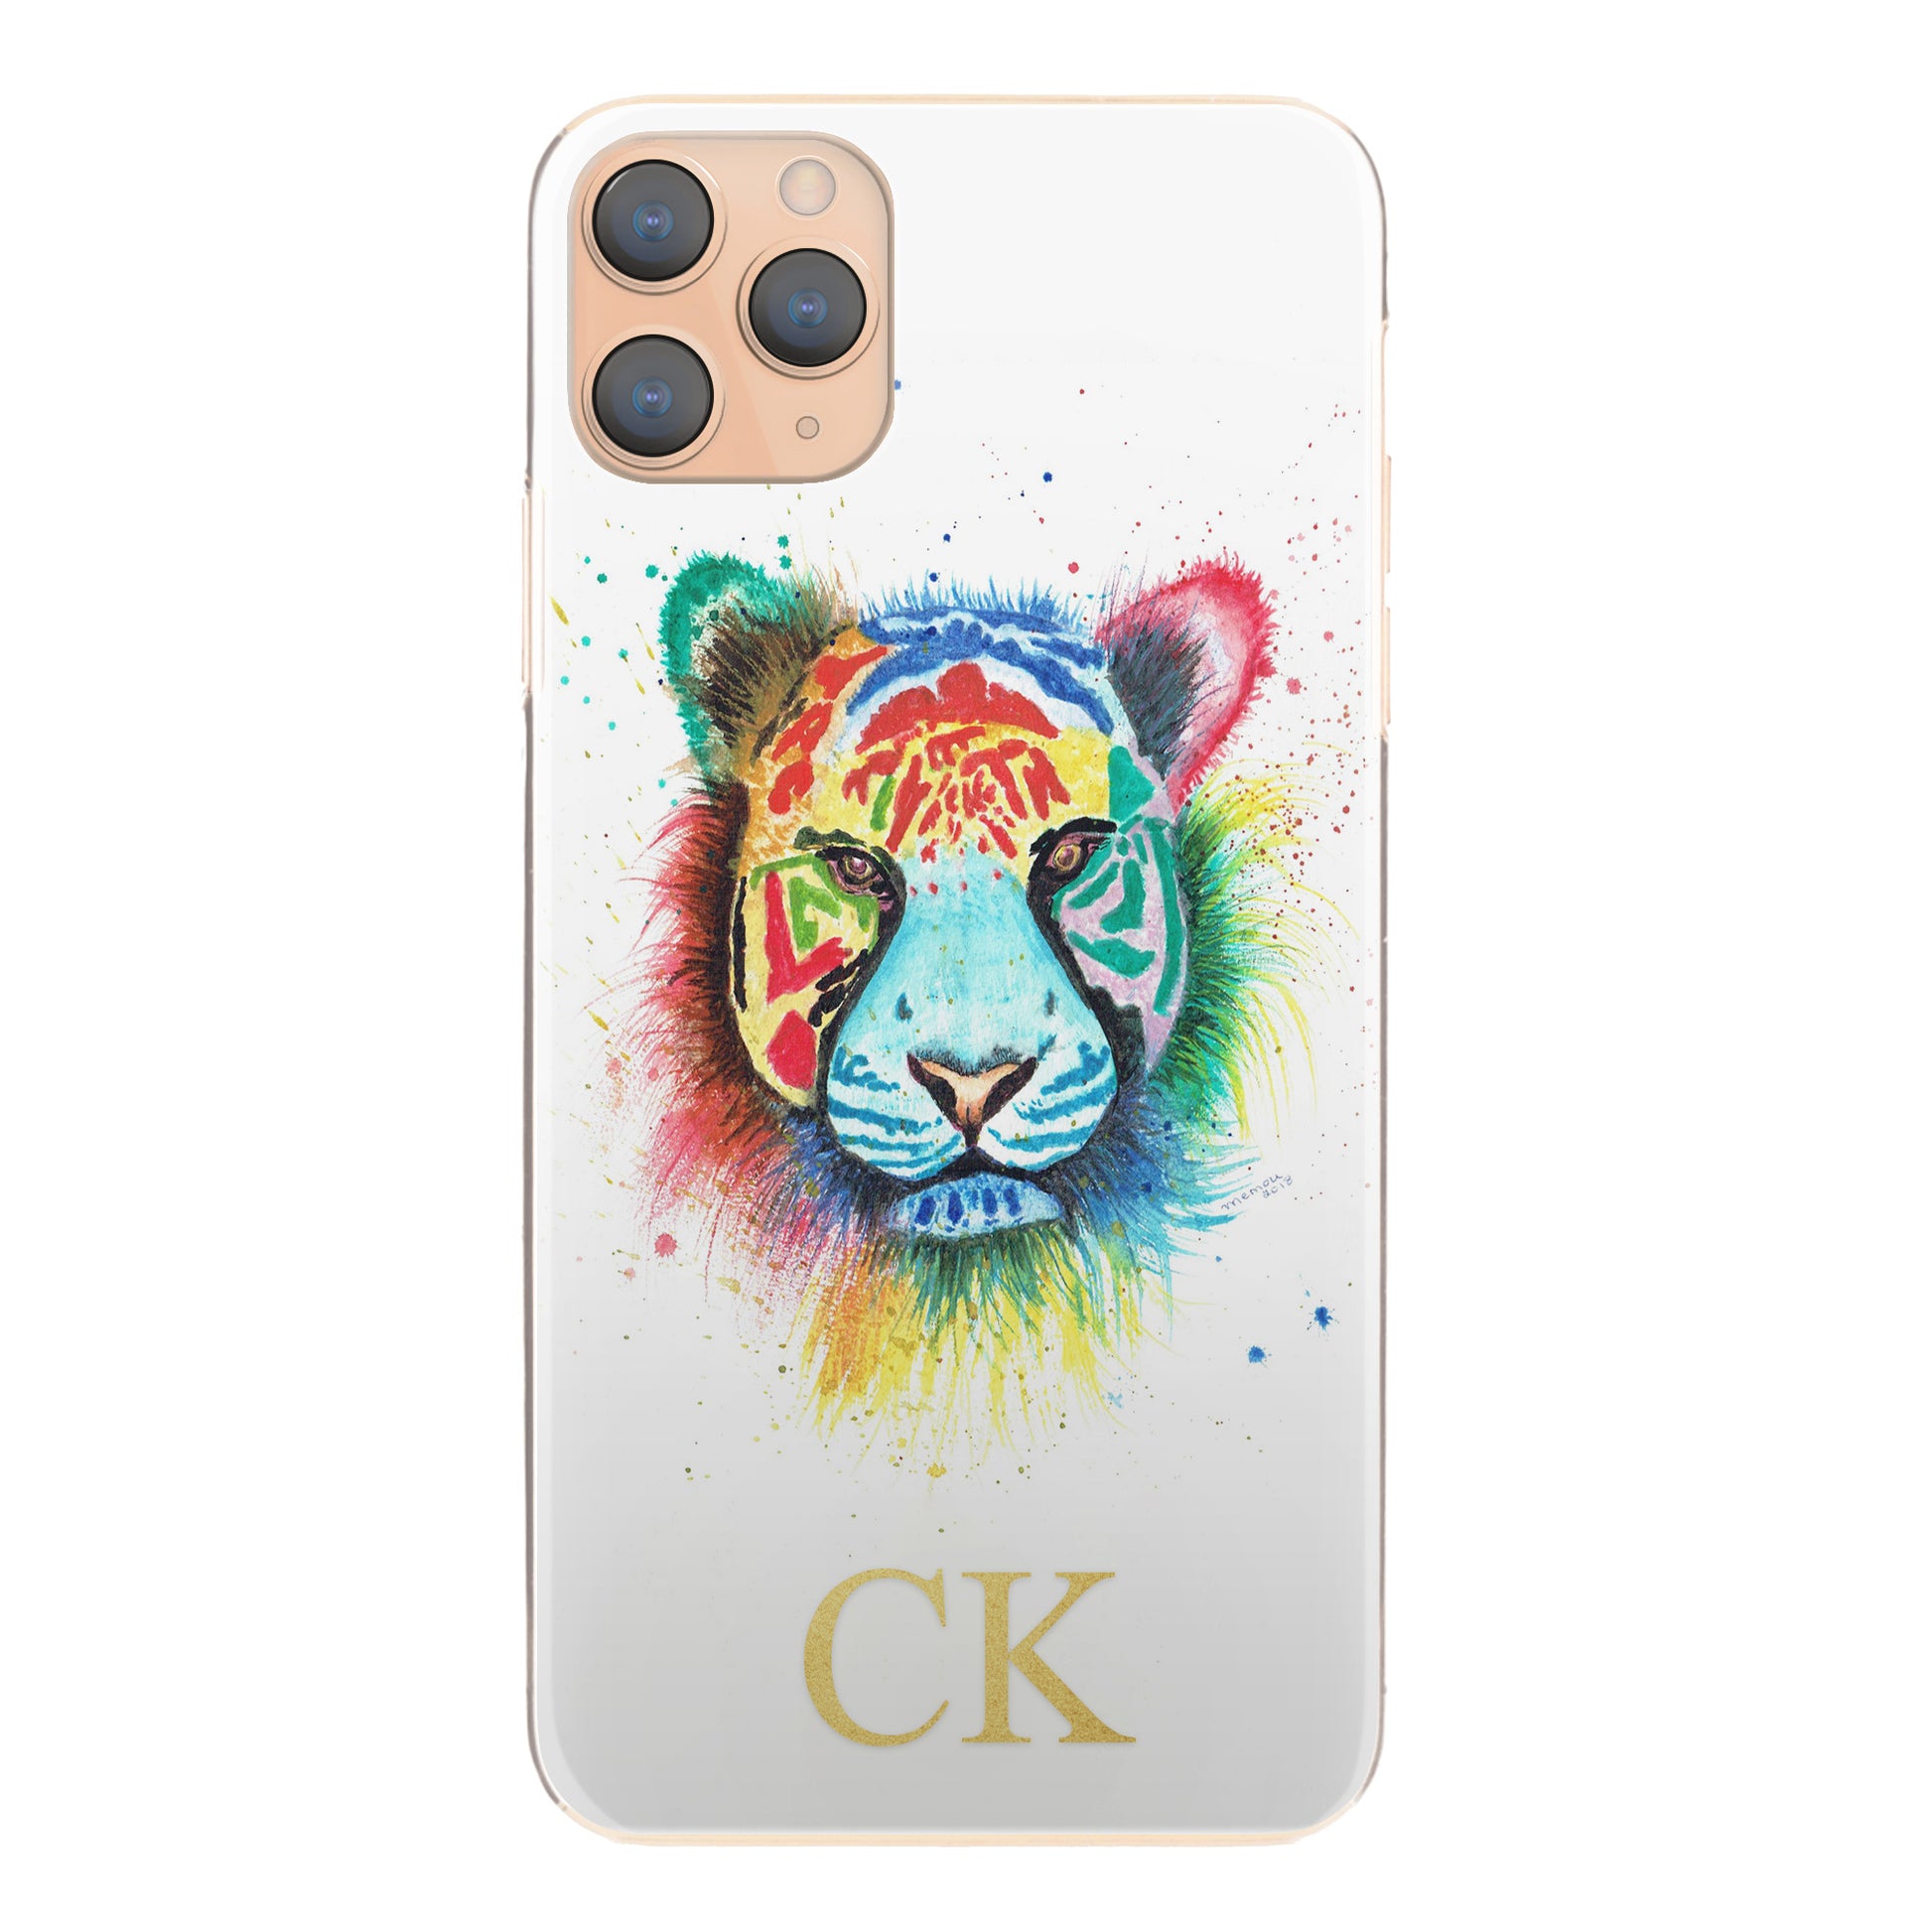 Personalised Apple iPhone Hard Case with Rainbow Tiger and Gold Initials